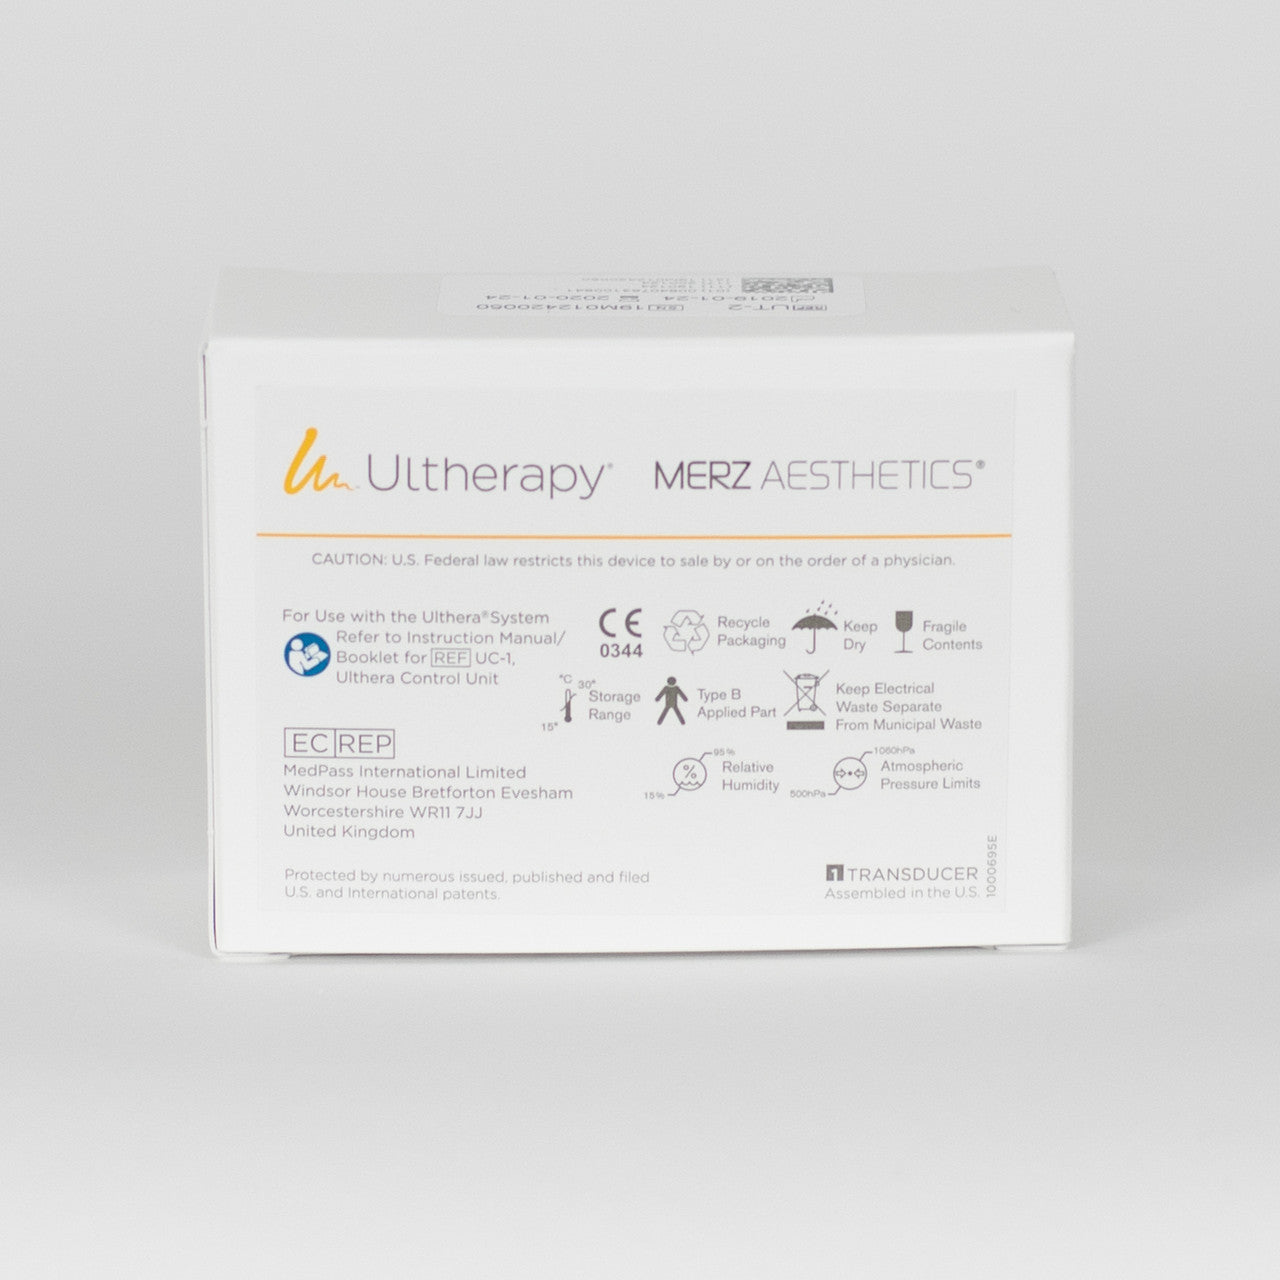 Ultherapy Transducer DeepSEE DS 4-4.5 (Blue) Product Label